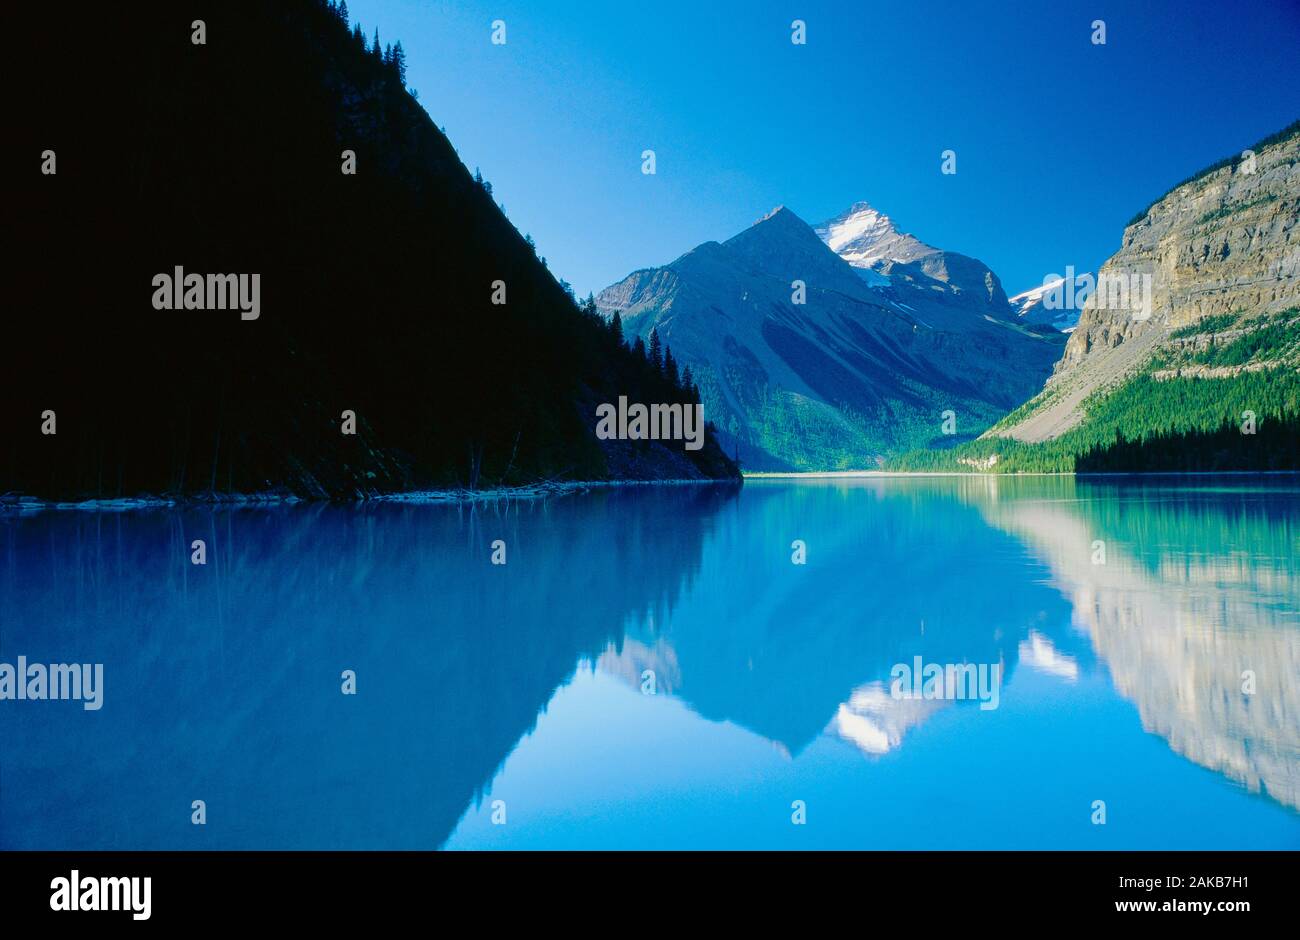 Landscape with view of mountains reflecting in Kinney Lake, Mount Robson Provincial Park, British Columbia, Canada Stock Photo